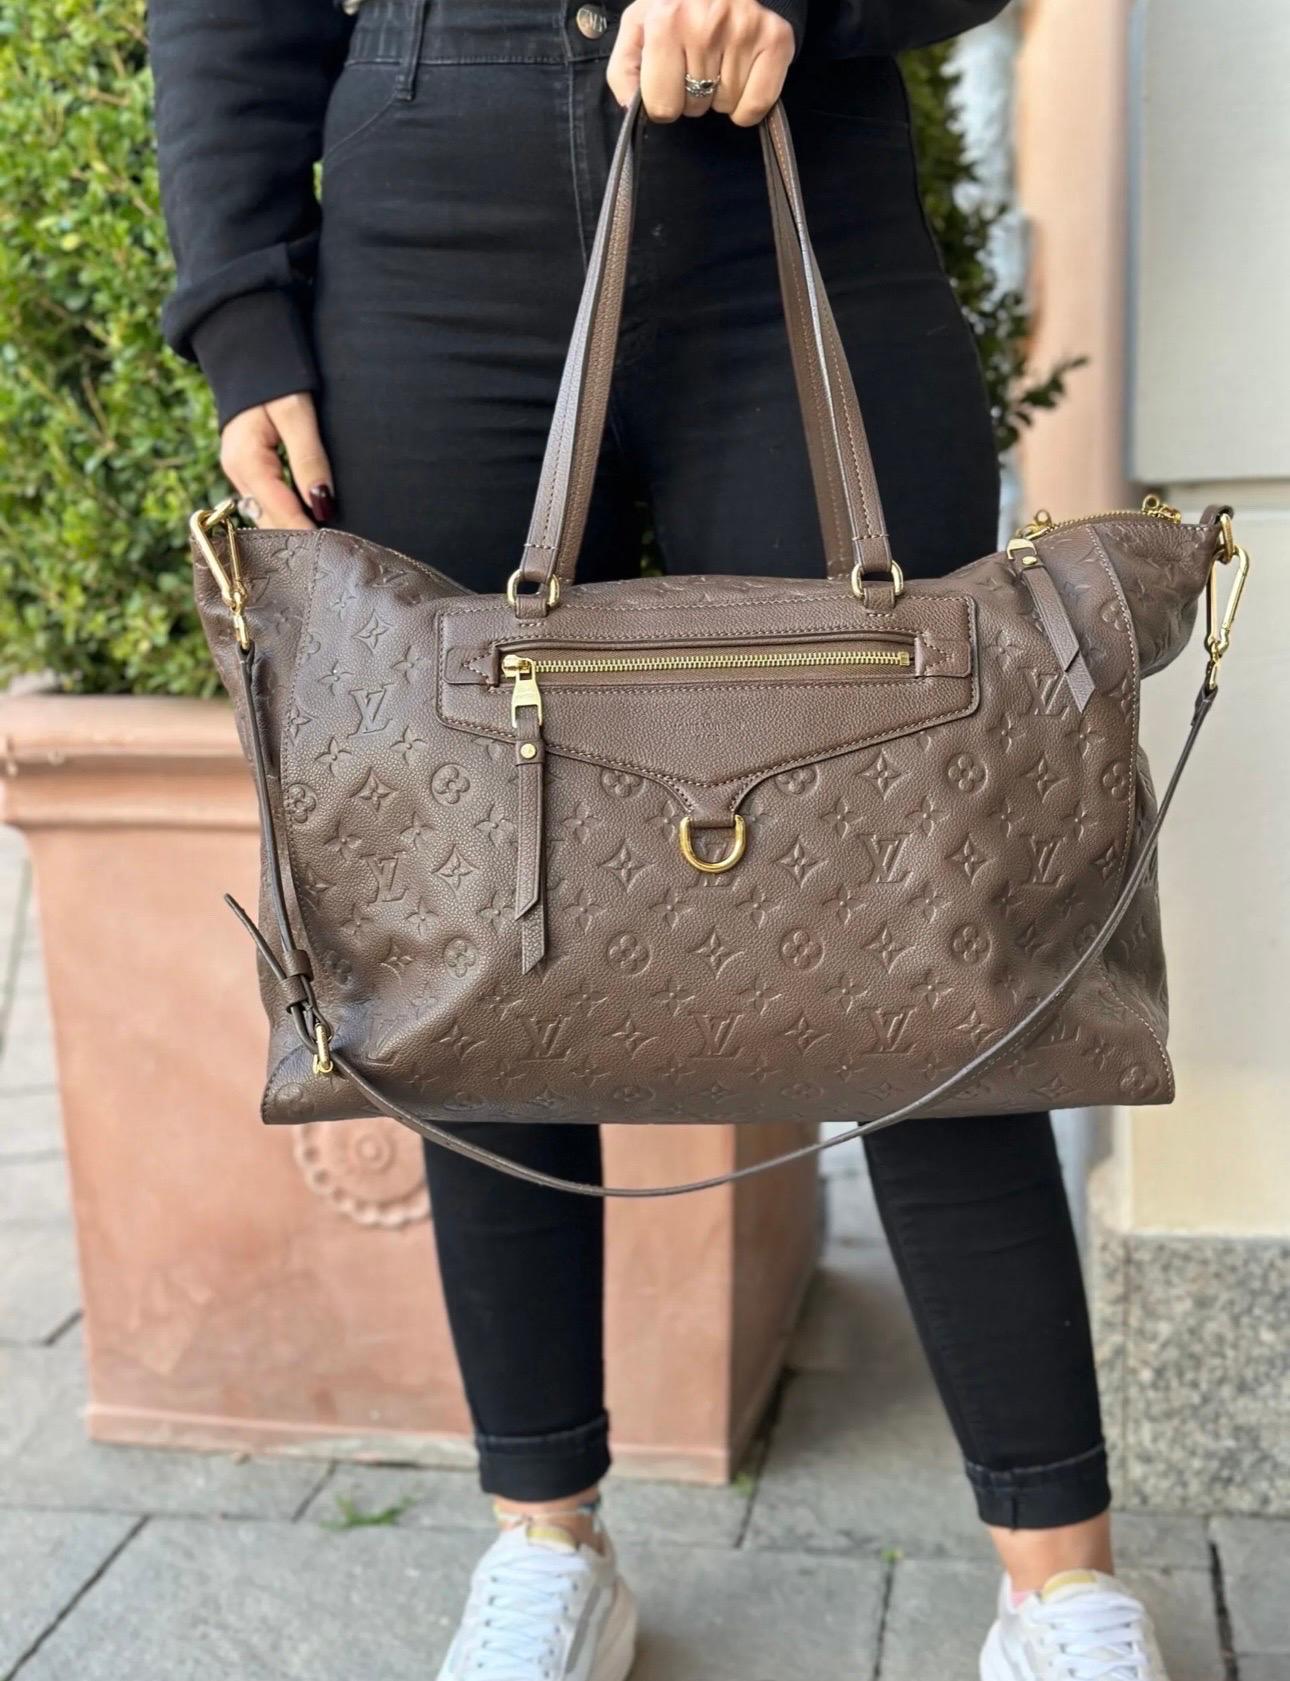 Louis Vuitton signed bag, made of brown leather with classic Empreinte monogram logo and golden hardware.

Equipped with a double handle in leather and a removable and adjustable shoulder strap to wear the bag by hand and on the